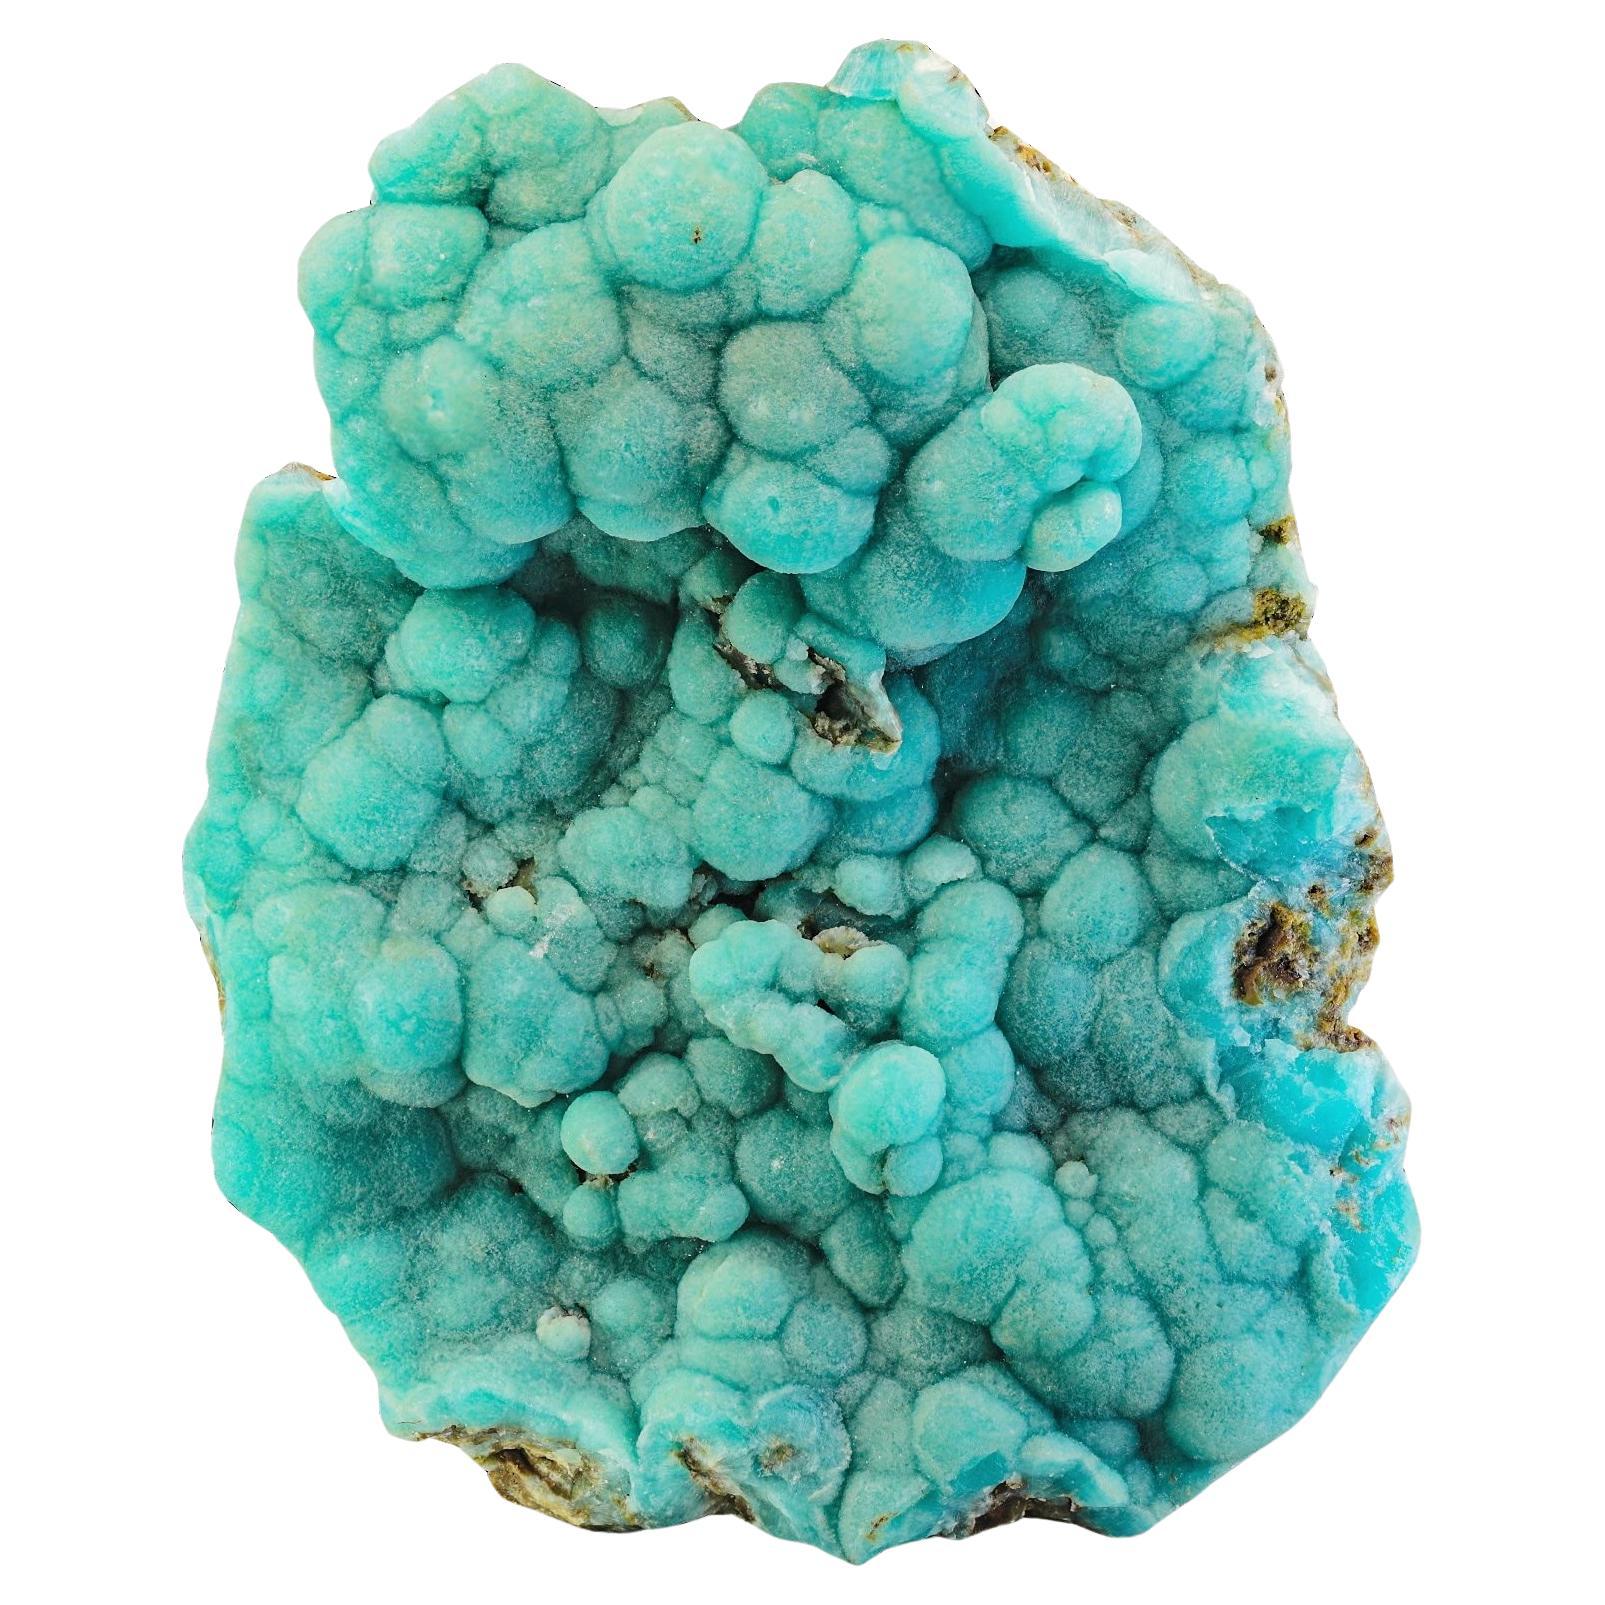 Botryoidal Clustering of Blue Aragonite Crystals on Matrix from Pakistan